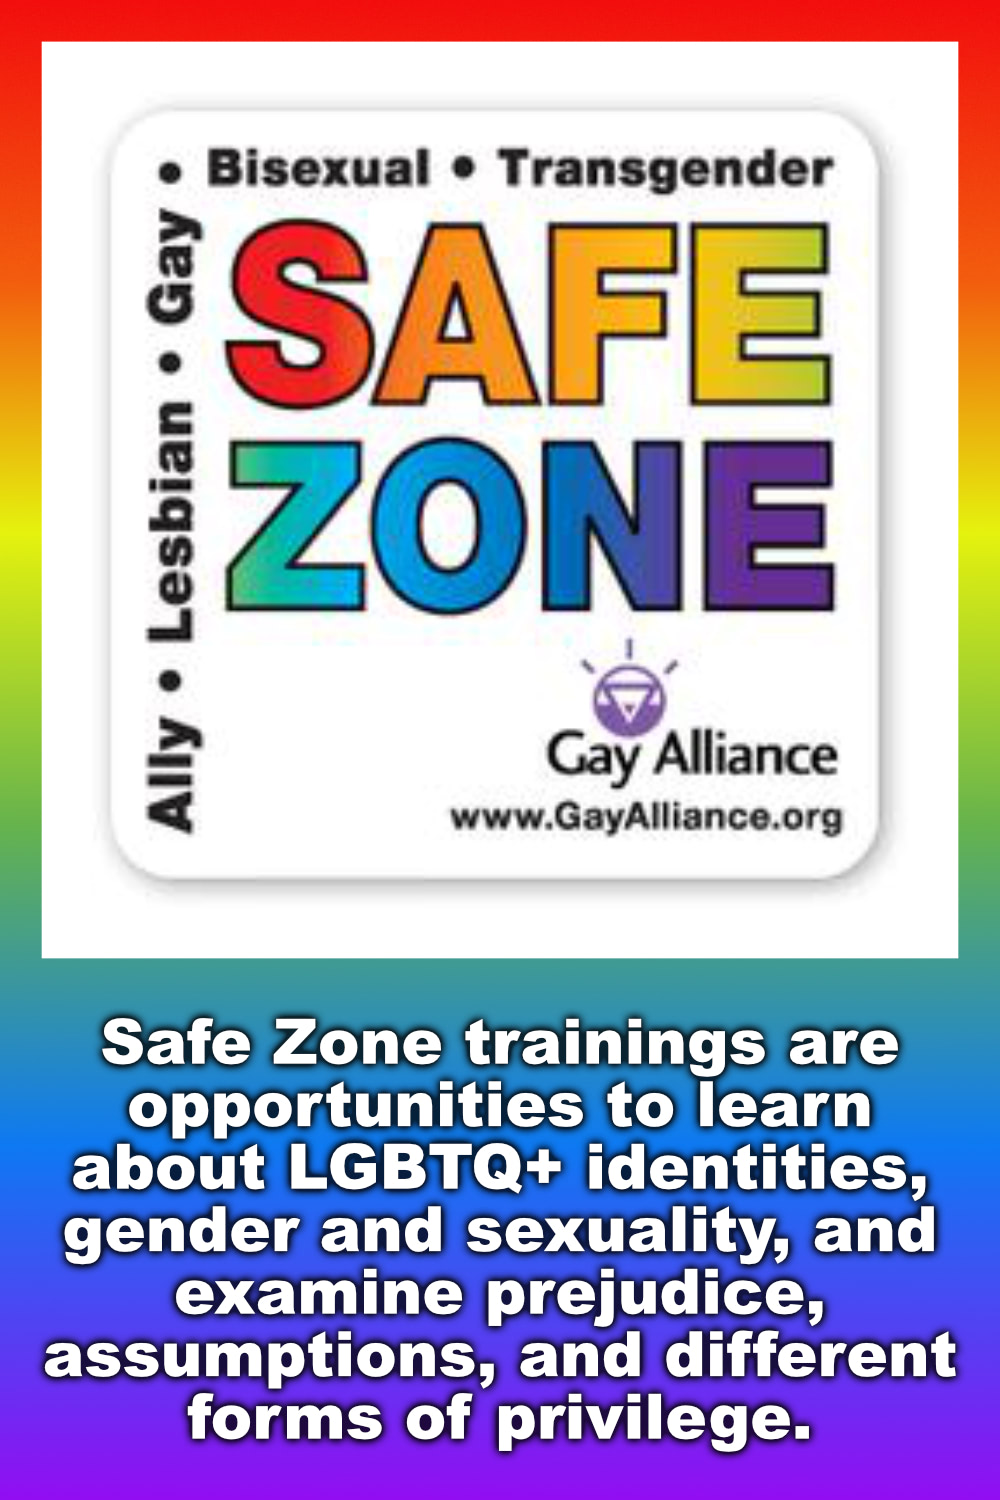 Safe Zone trainings are opportunities to learn about LGBTQ+ identities, gender and sexuality, and examine prejudice, assumptions, and different forms of privilege.